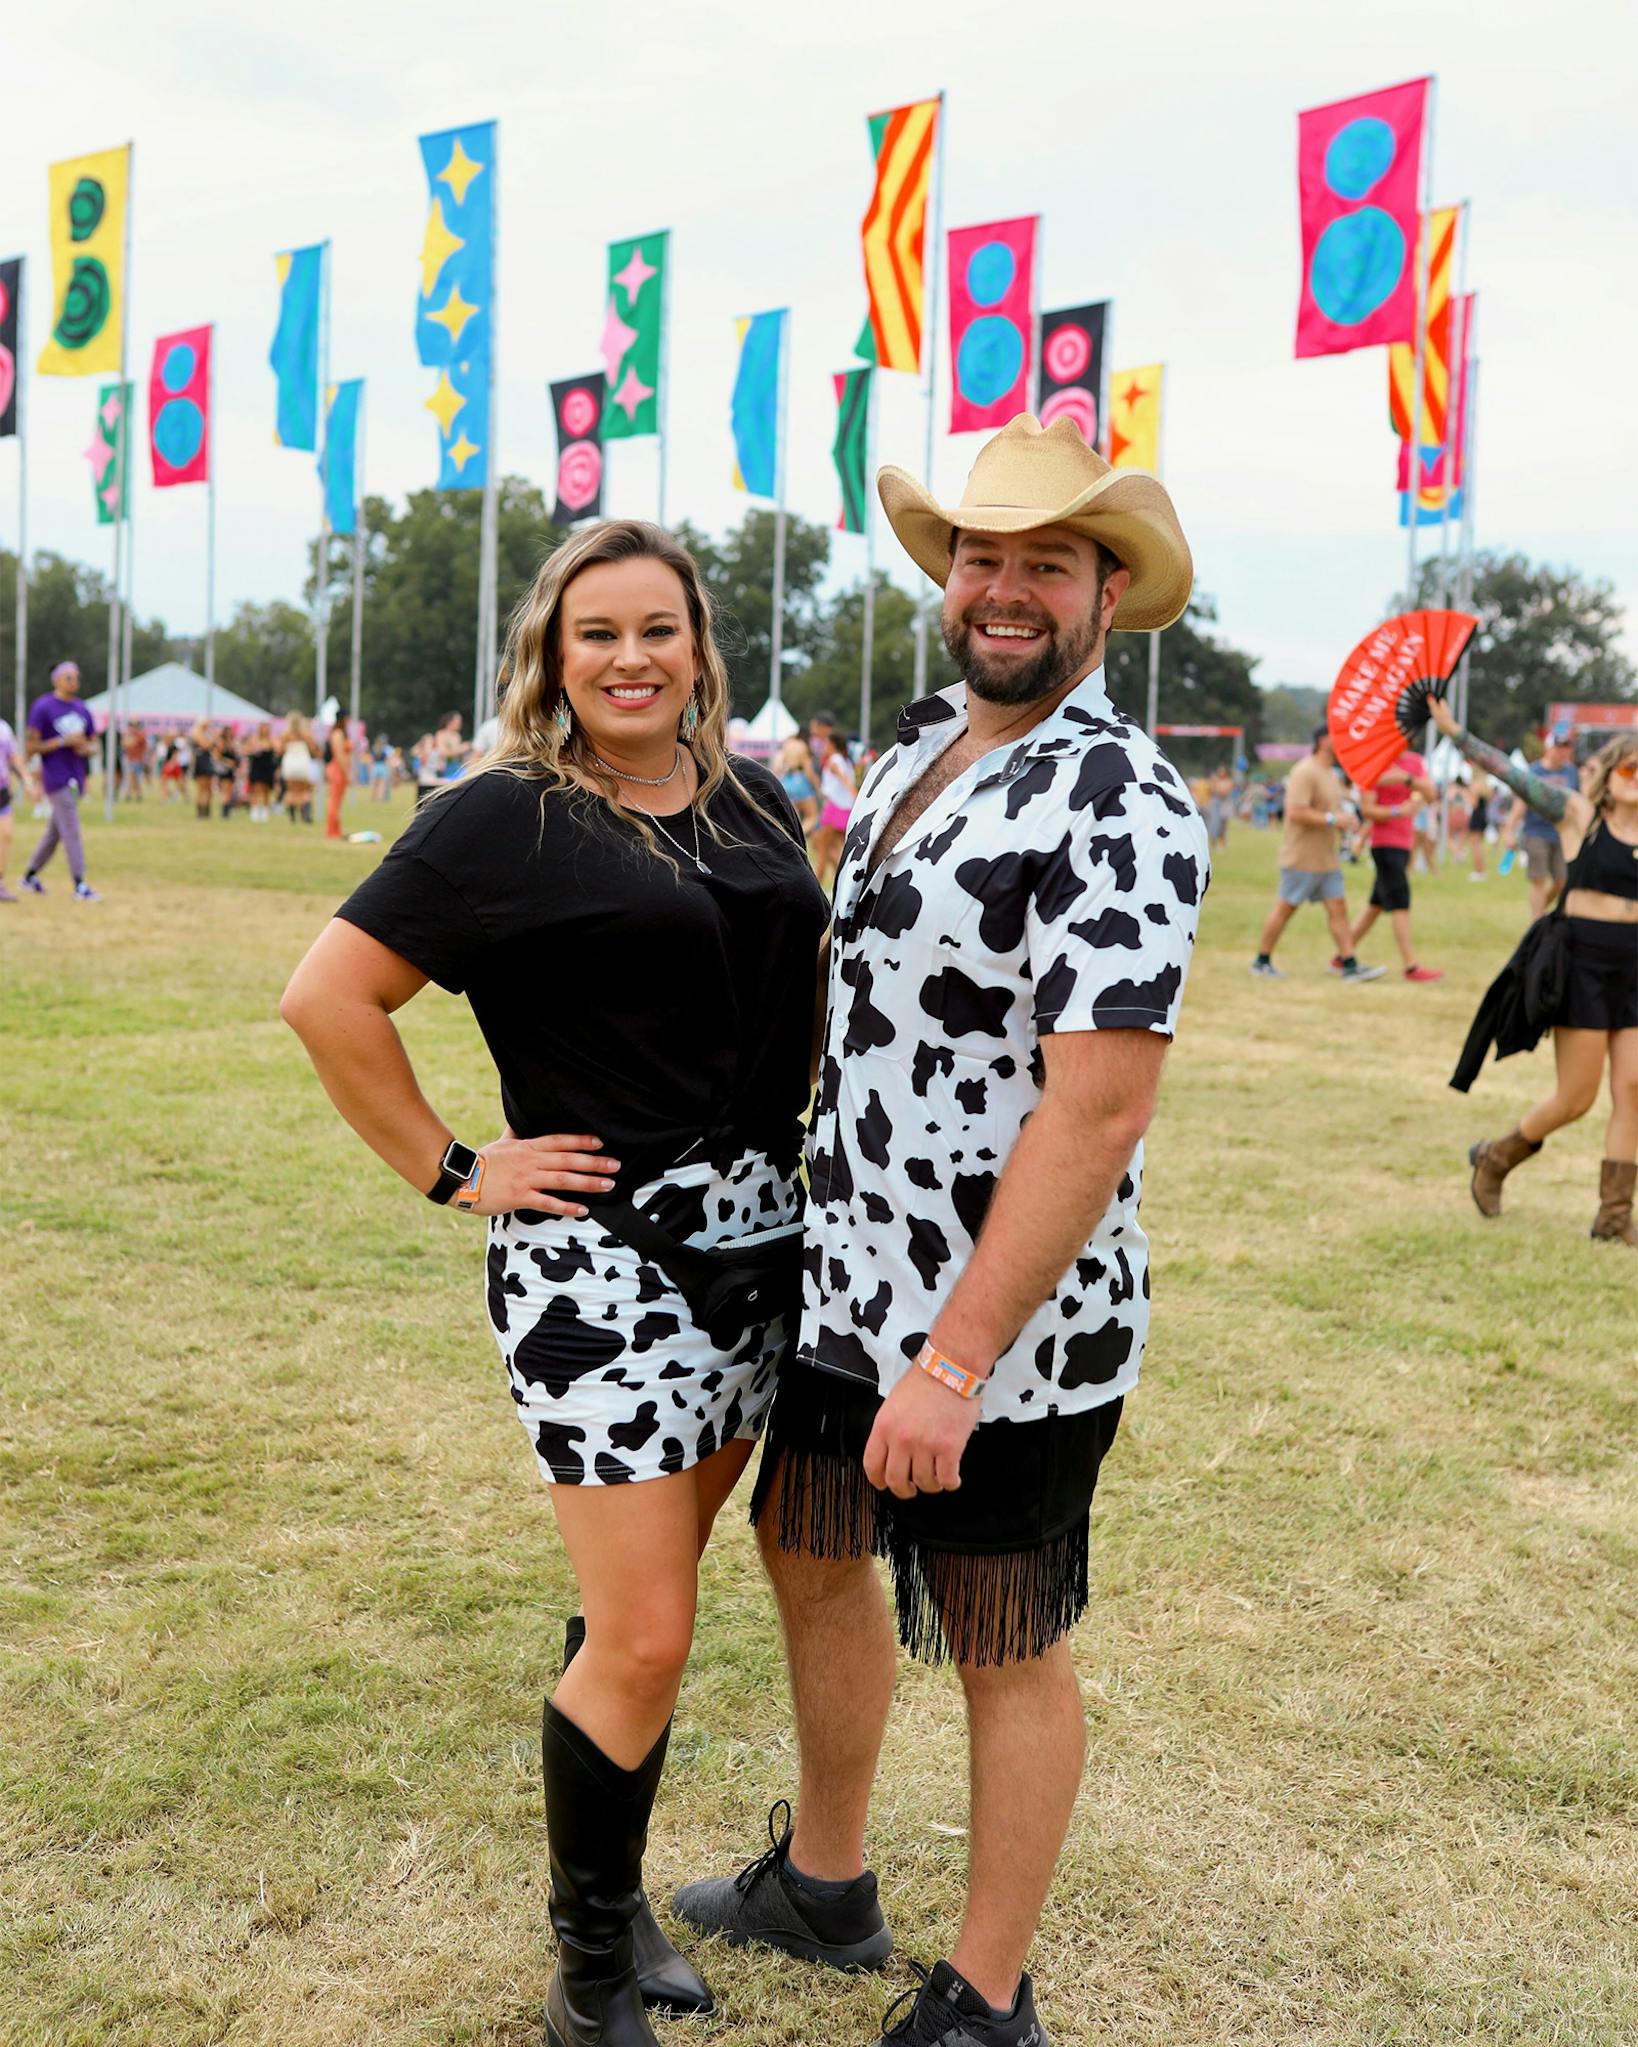 Photos: What To Wear To ACL Fest; The Fashion We're Seeing This Year